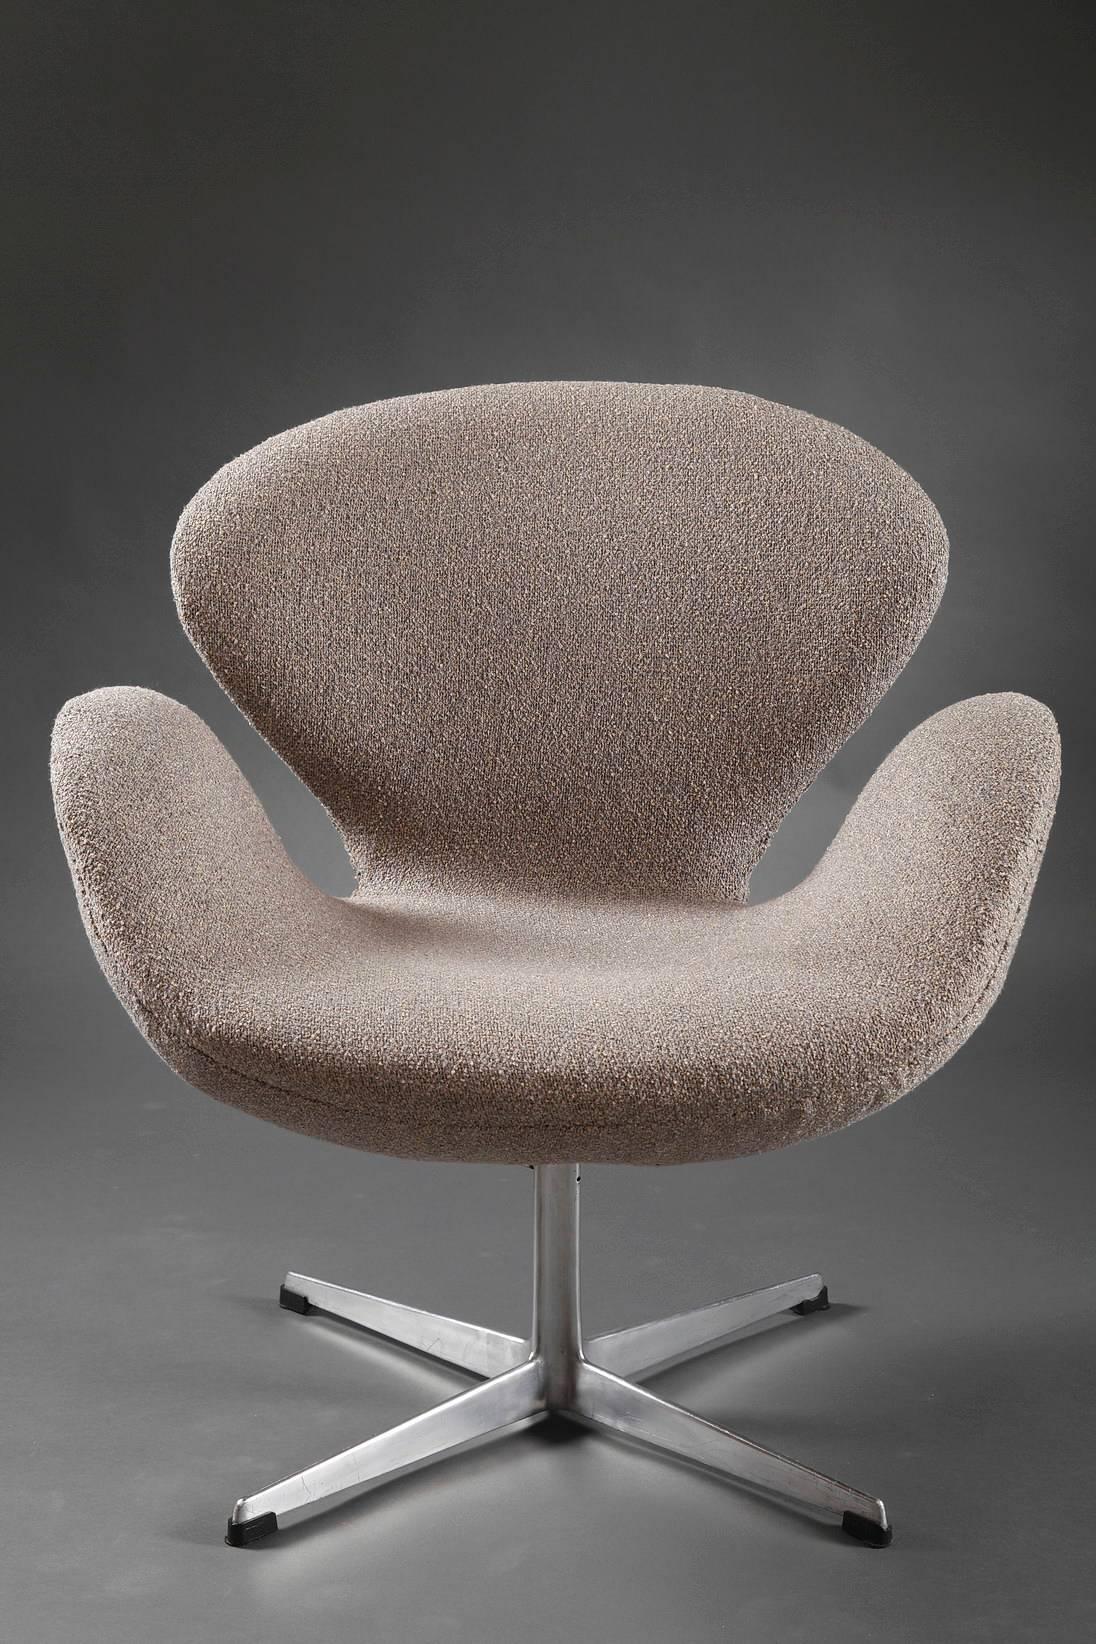 In 1958 the swan was a technologically innovative chair. No straight lines, only curves. A moulded shell of synthetic material on an aluminum star swivel base. A layer of cold foam covers the shell and fabric of leather in a wide range of colors is